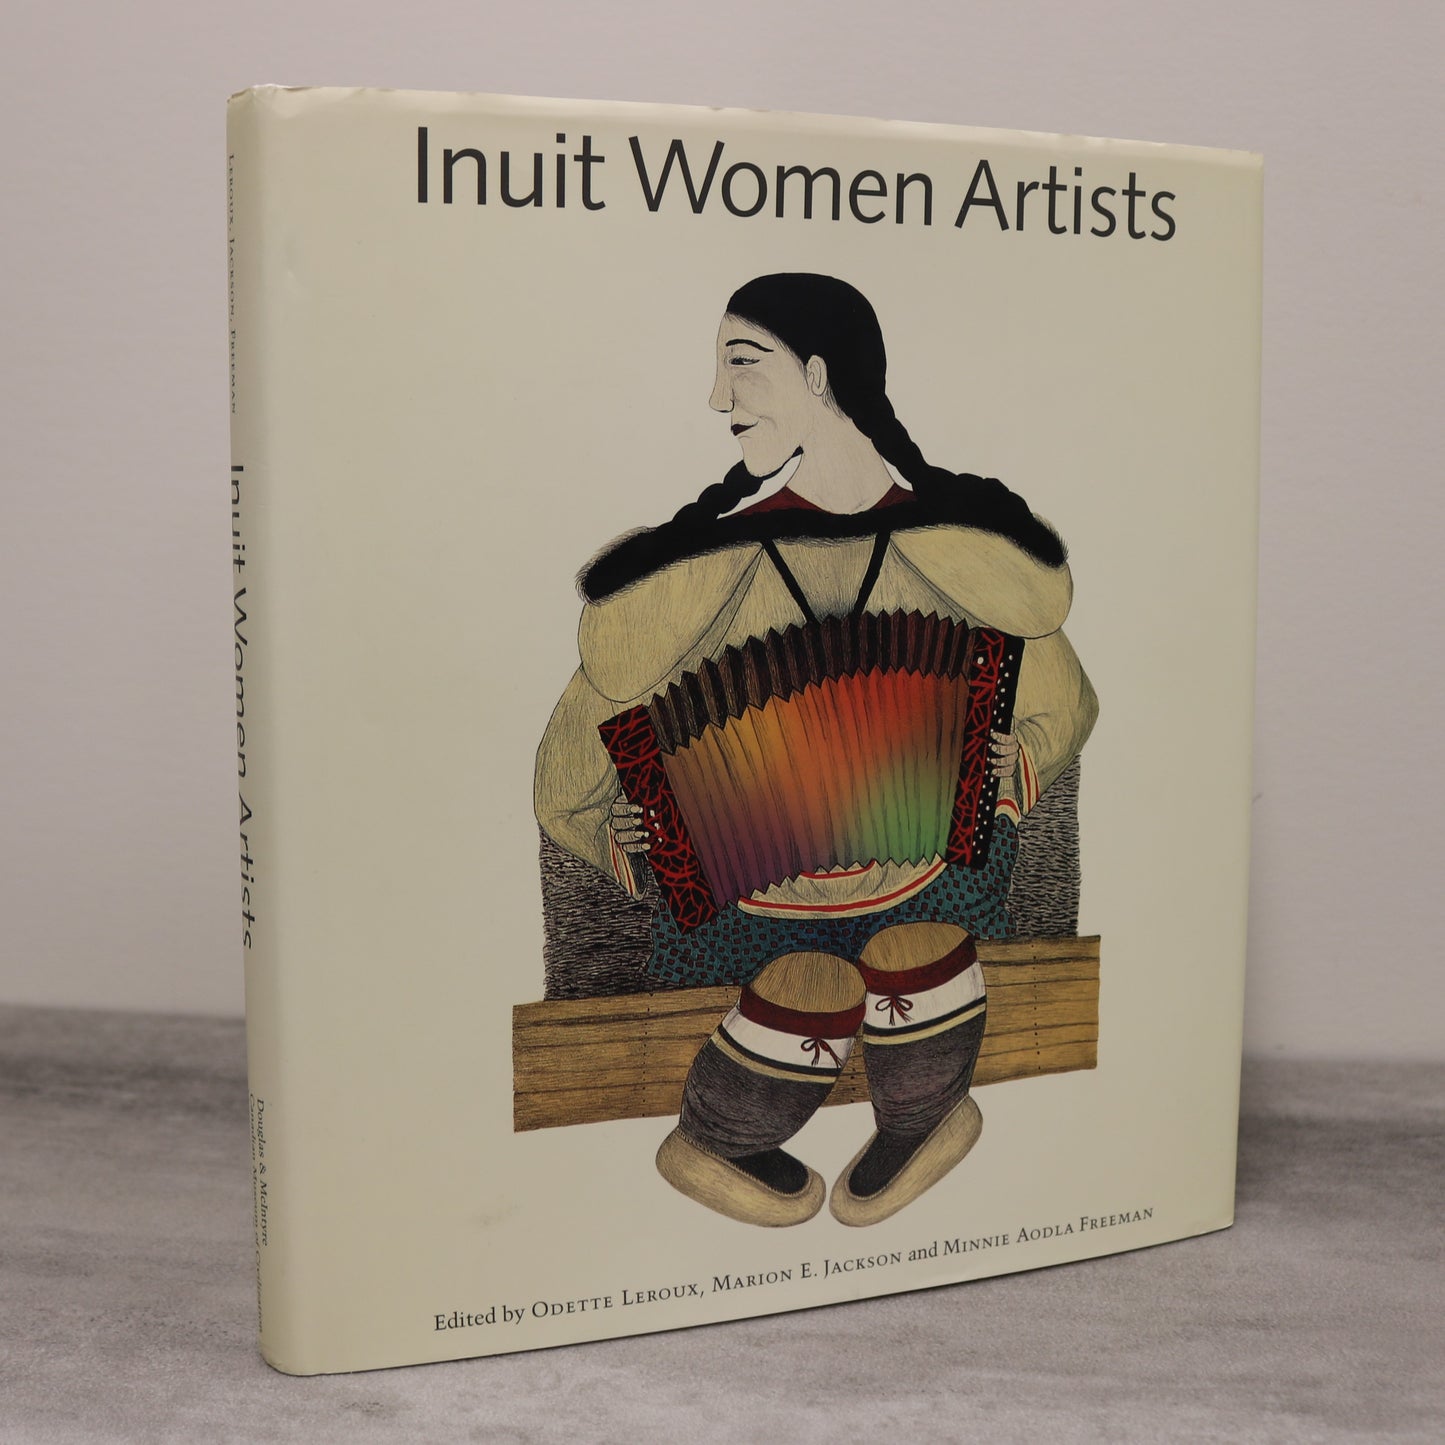 Inuit Women Artists Canada Canadian First Nations Indigenous Art Used Book